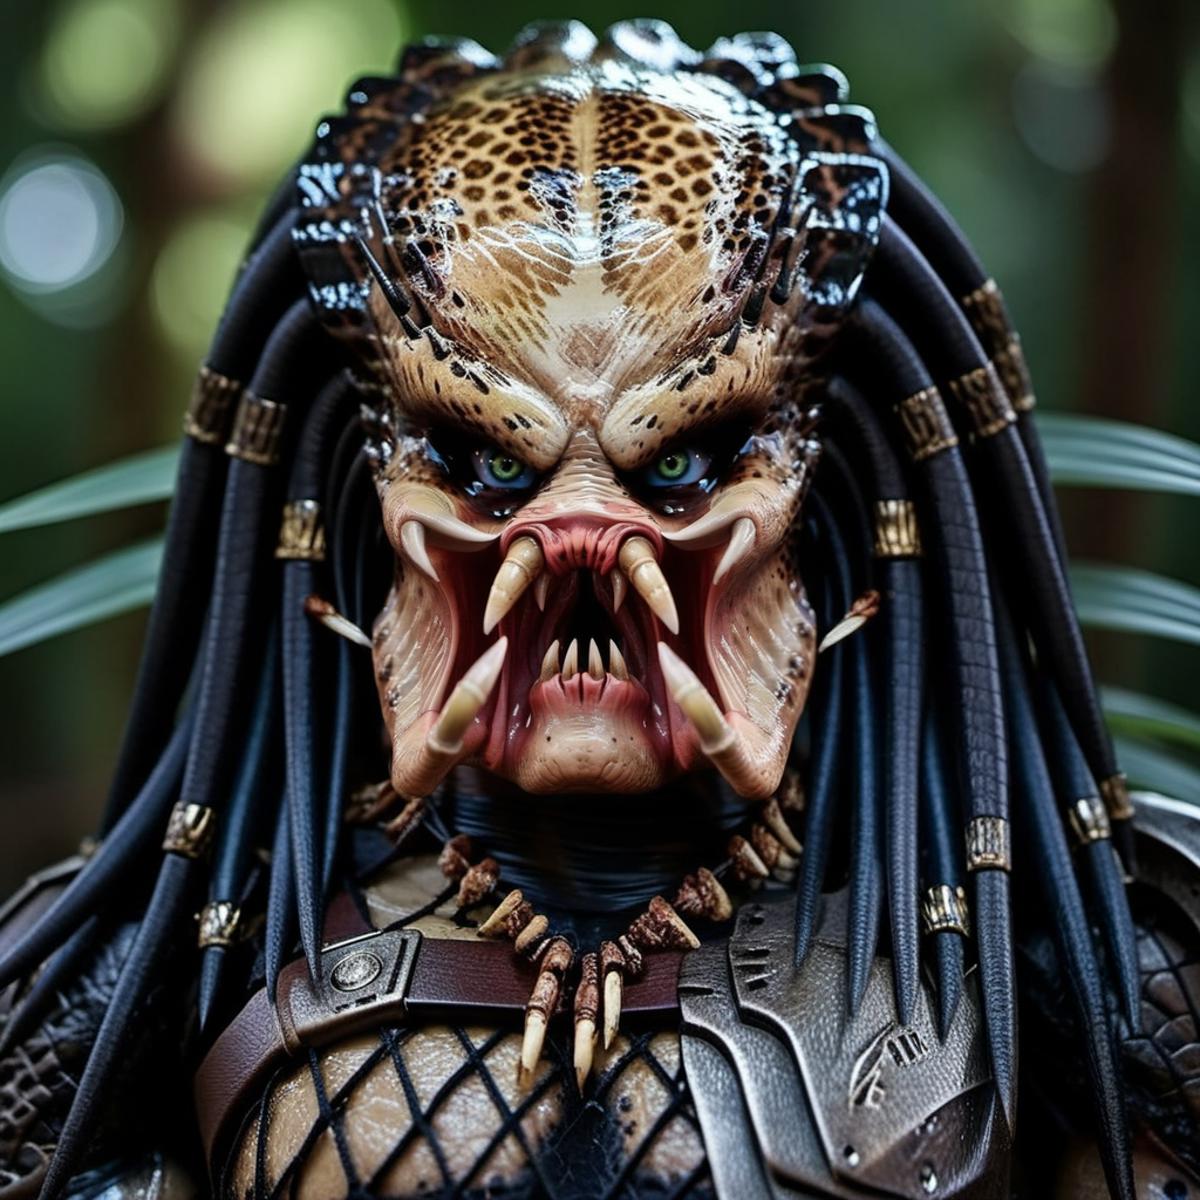 The Alien Predator Mask with Sharp Teeth and Eyes, and a Necklace.